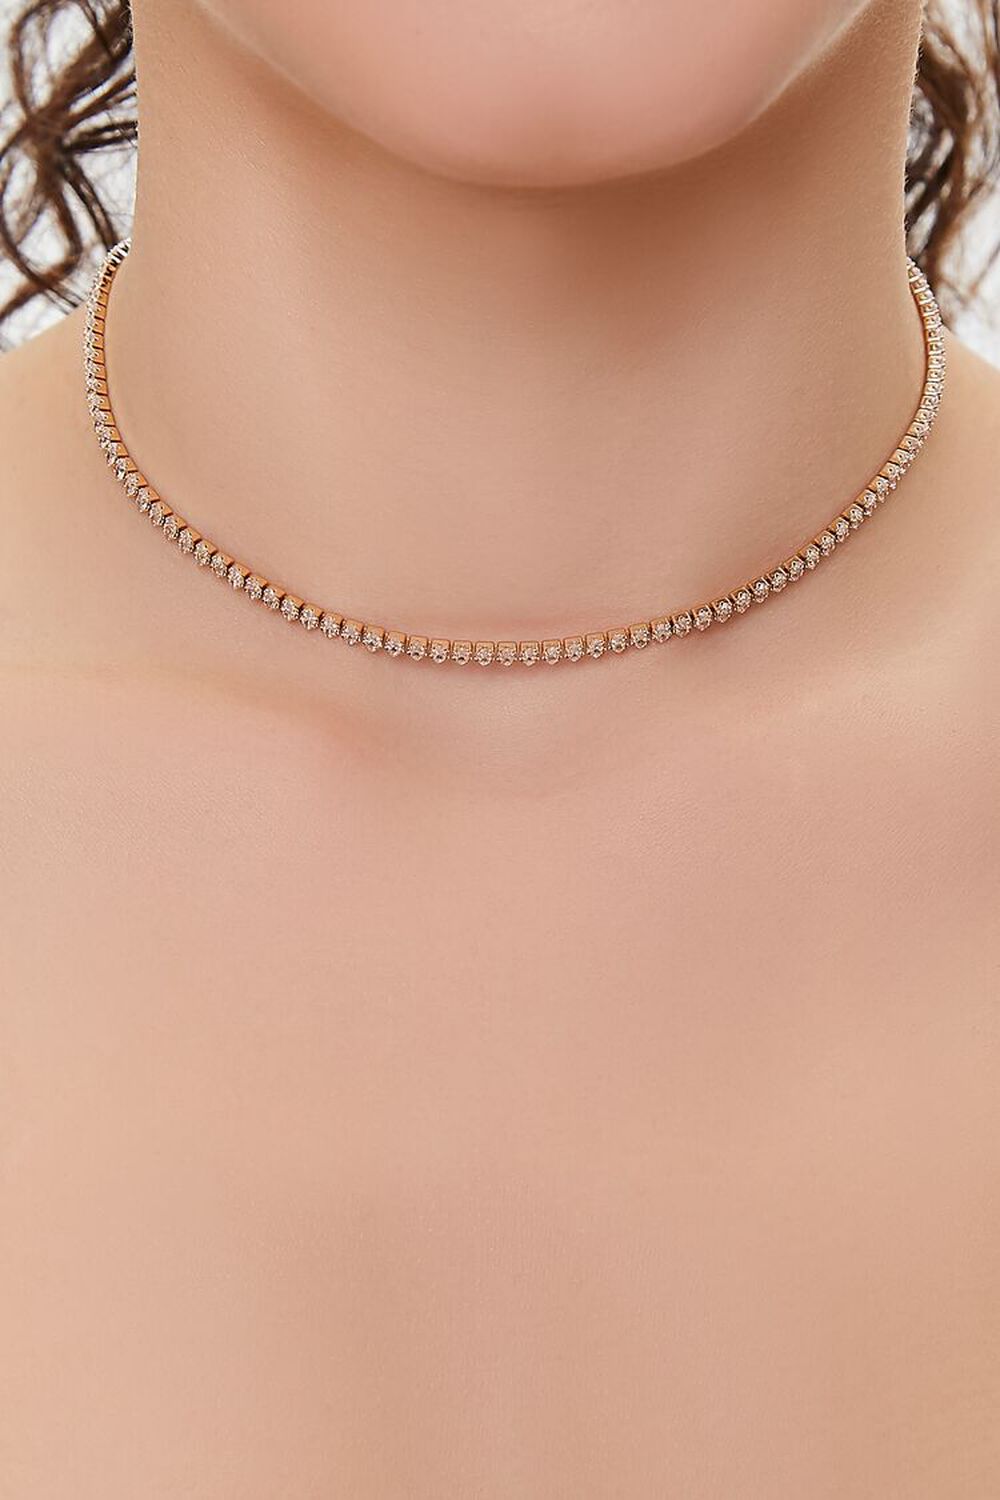 GOLD/CLEAR Rhinestone Chain Choker Necklace, image 1